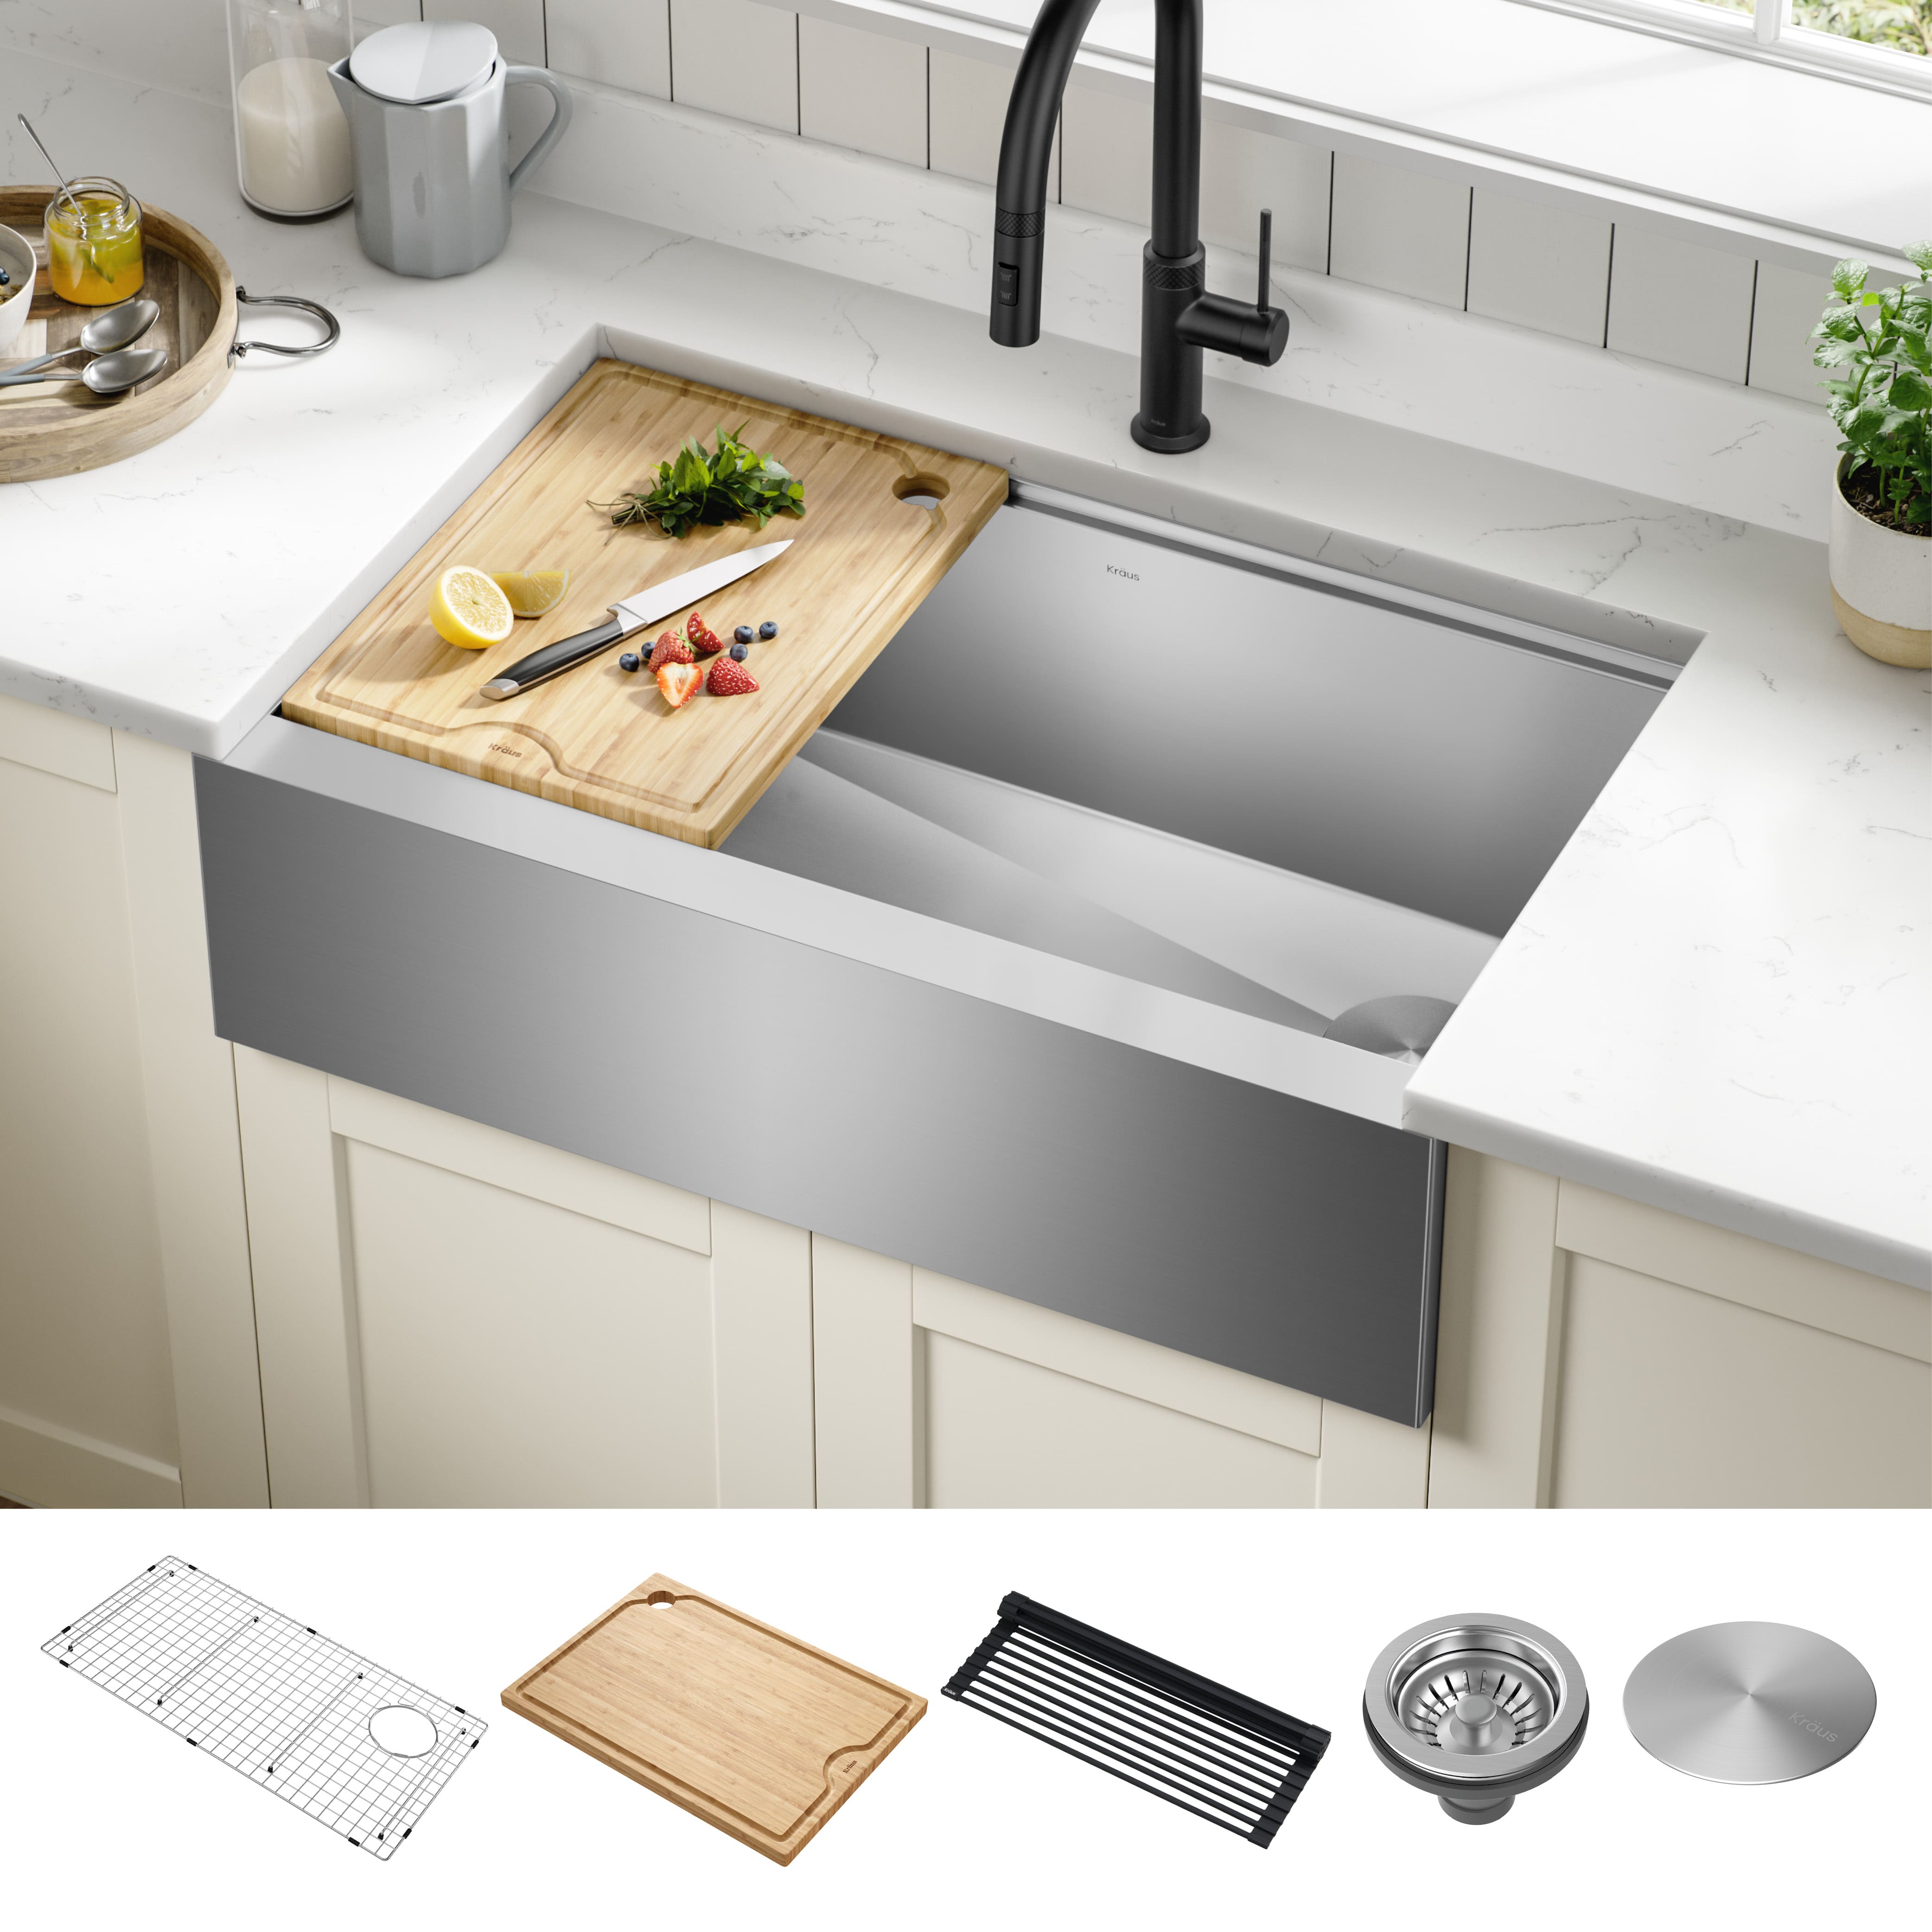 KRAUS Kore Workstation 33-inch Farmhouse Flat Apron Front 16 Gauge Single Bowl Stainless Steel Kitchen Sink with Accessories (Pack of 5) - image 2 of 16